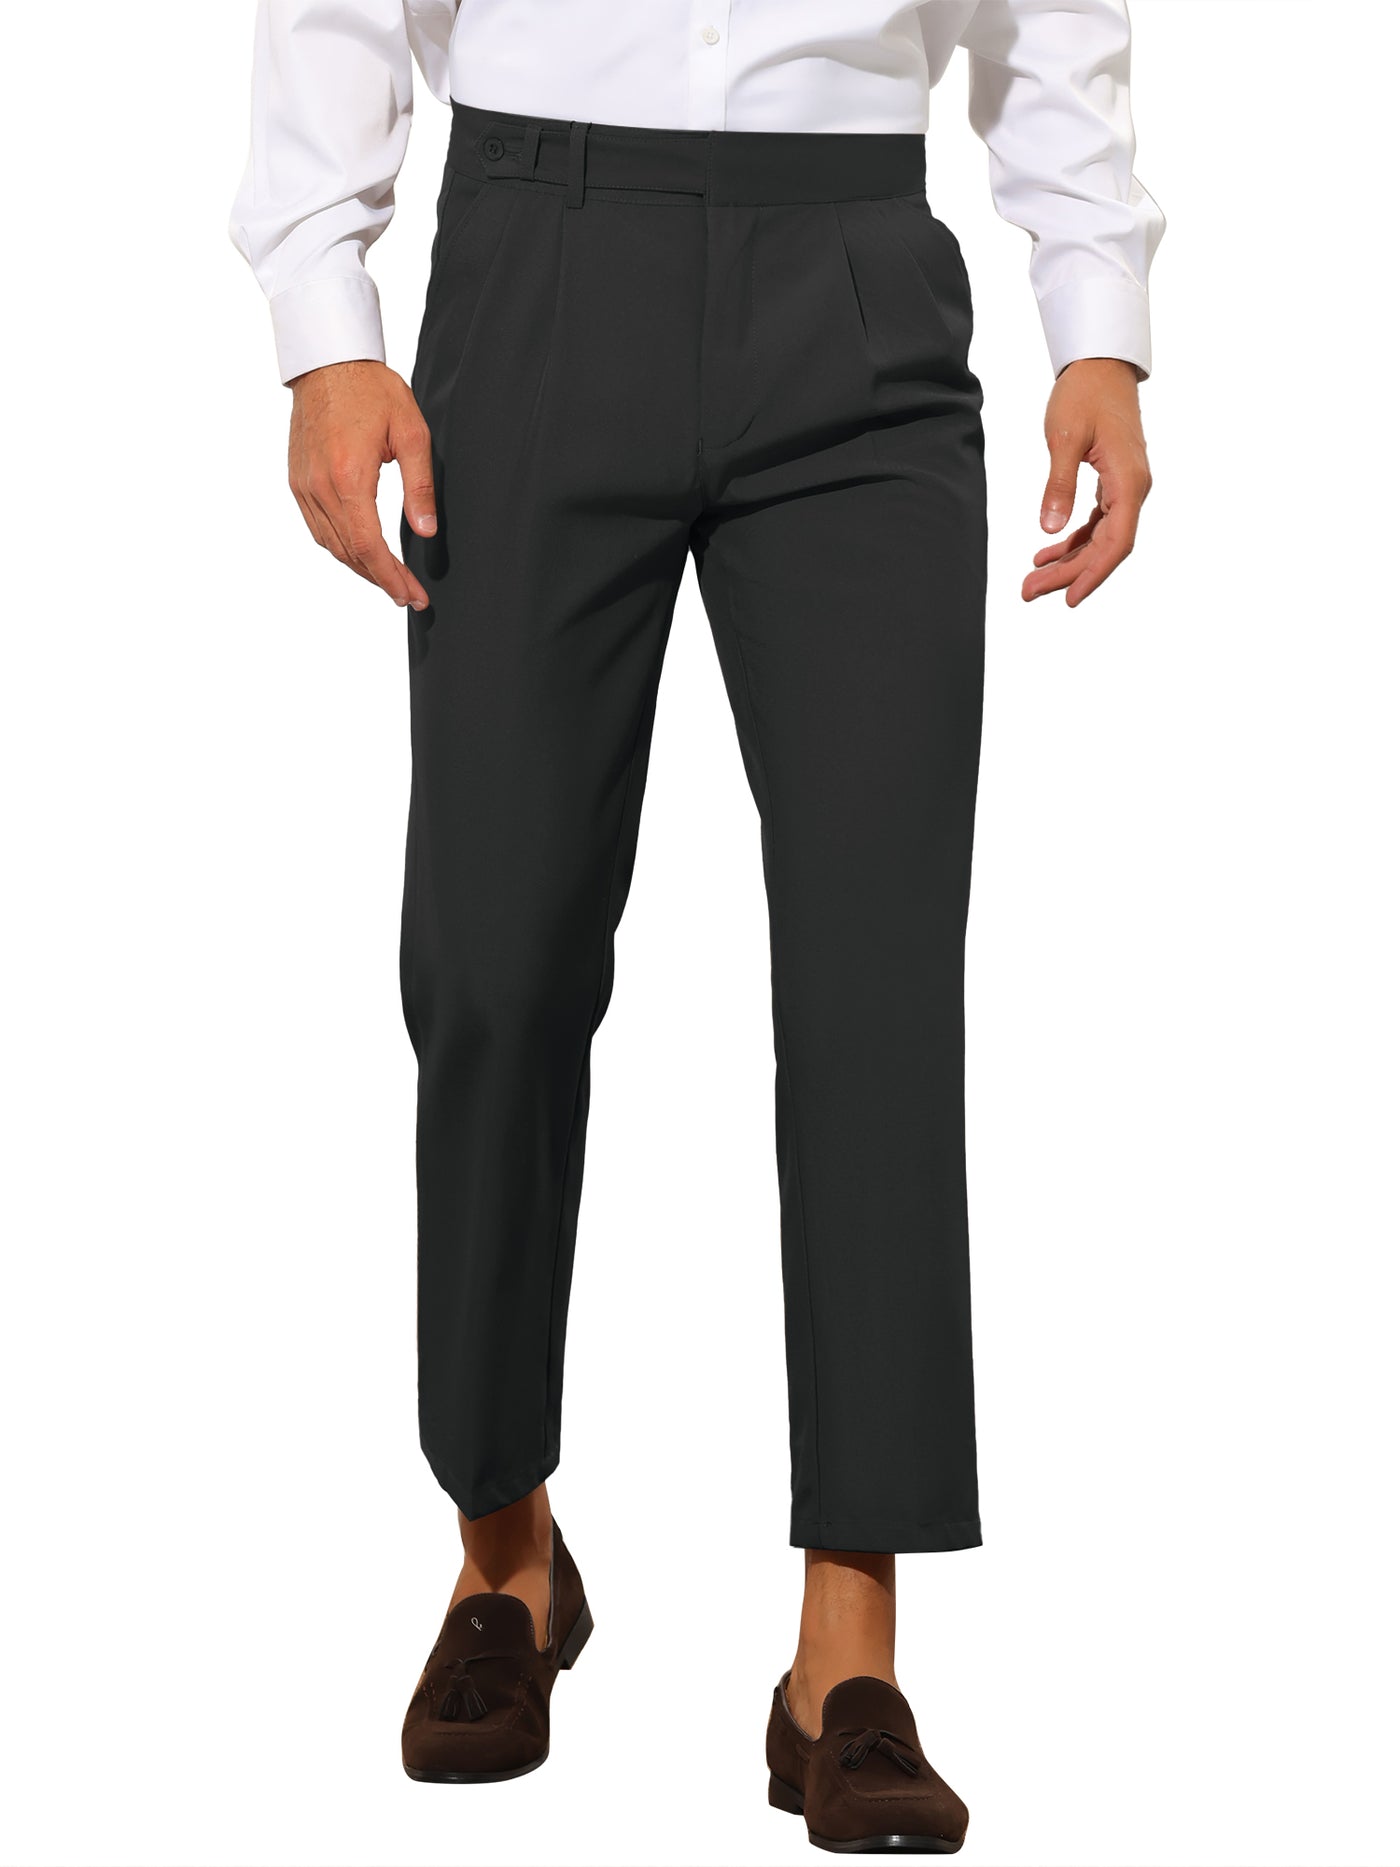 Bublédon Cropped Dress Pants for Men's Slim Fit Pleated Front Solid Business Chino Trousers